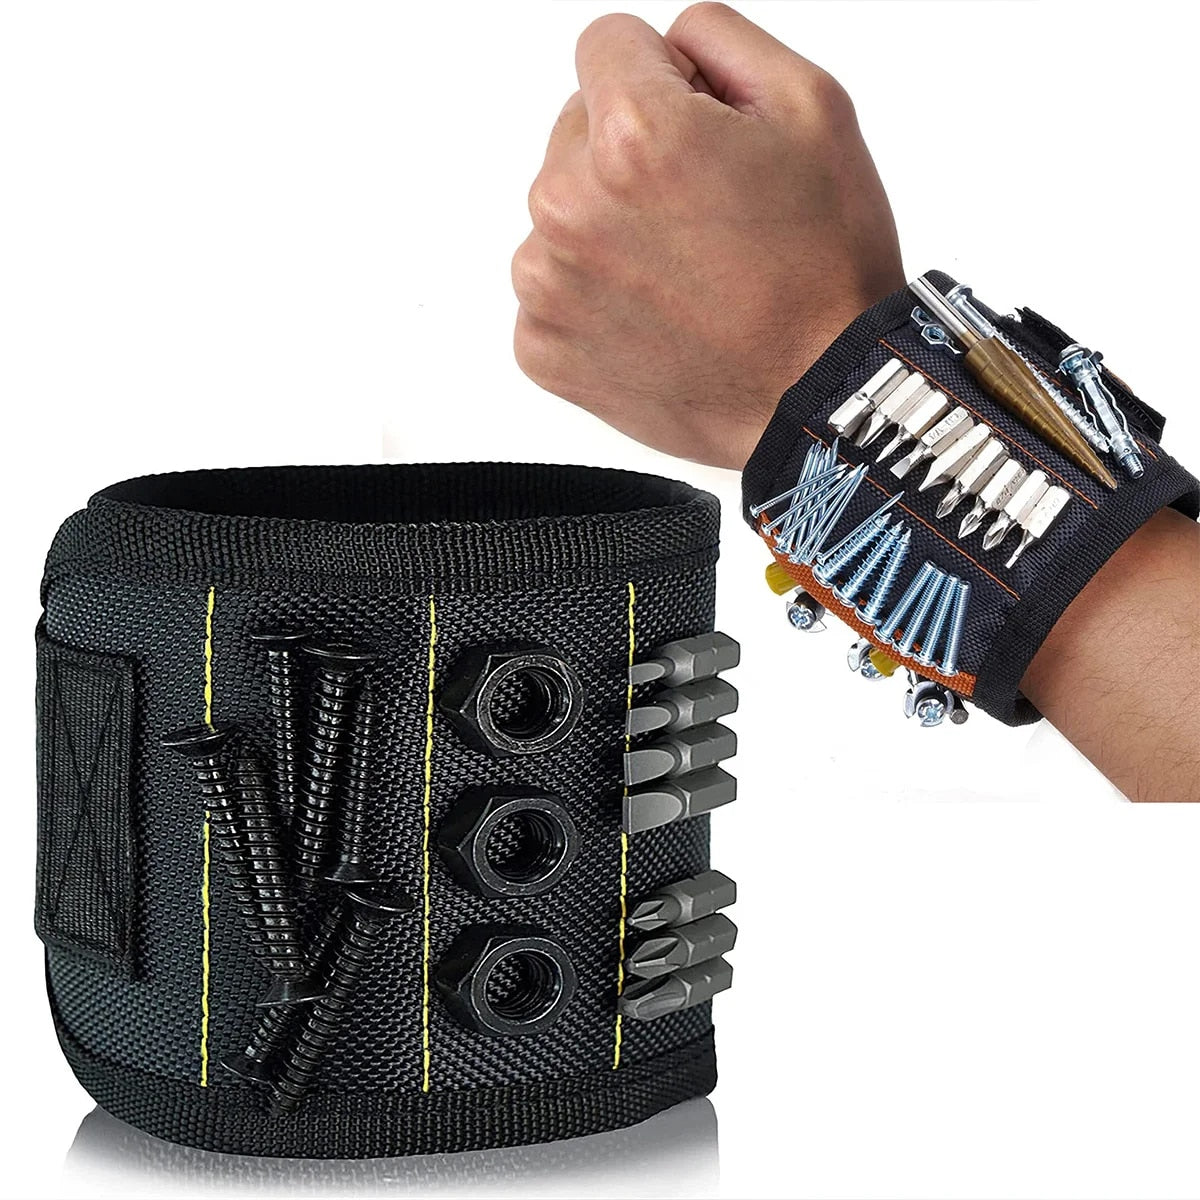 Magnetic Wristband Holder for Screws, Nails, Drill Bits and More